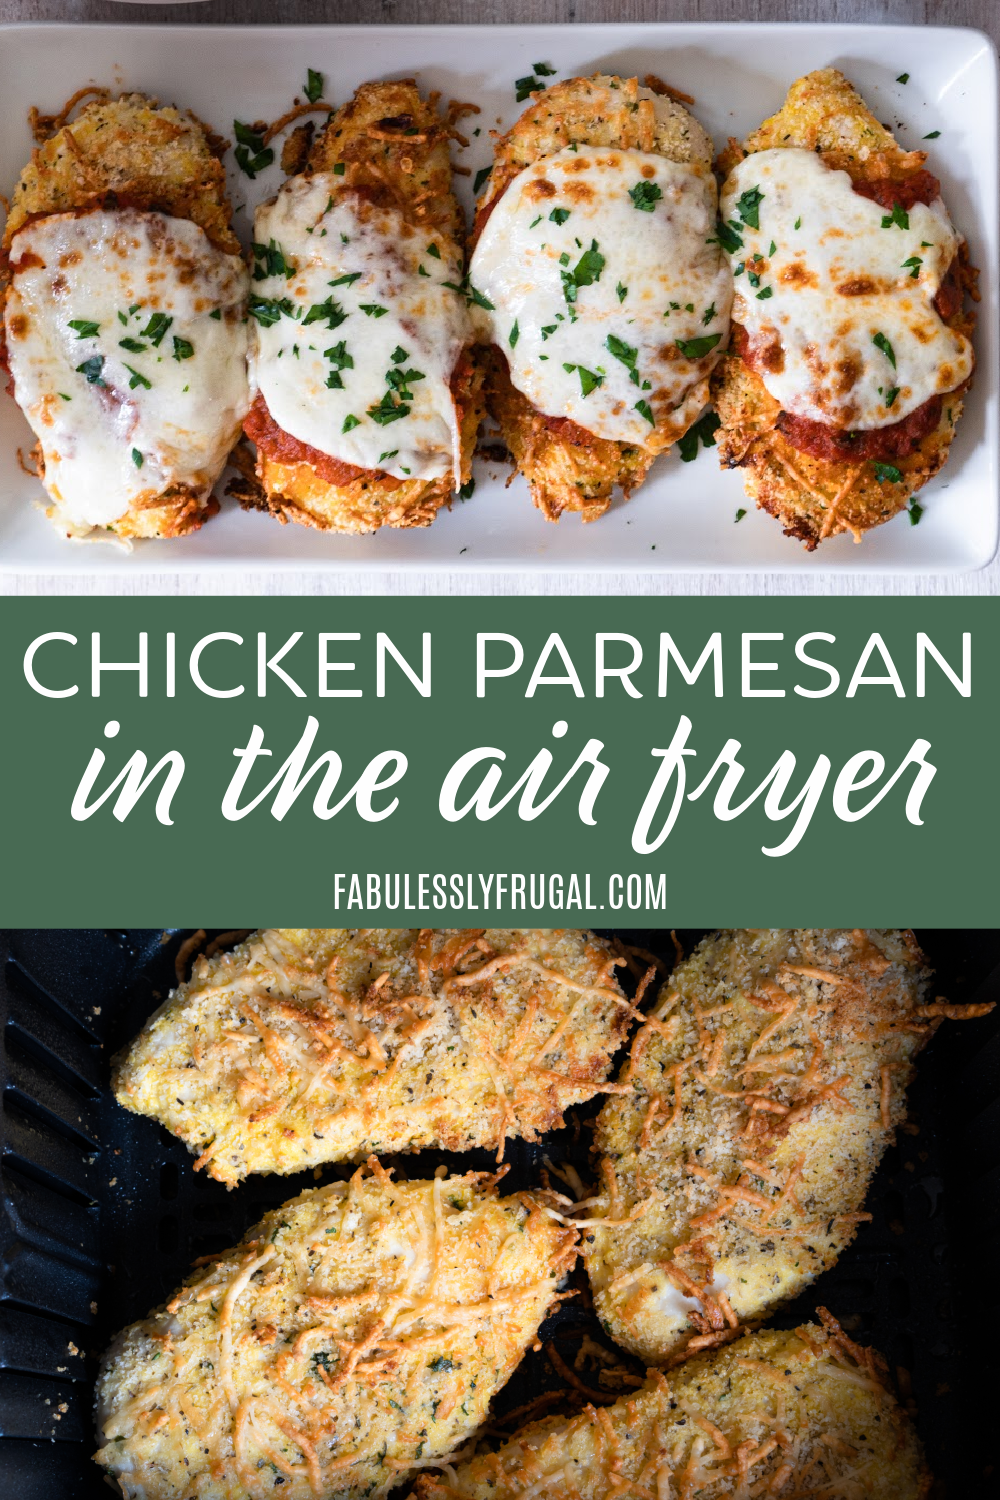 The best chicken parmesan you will ever have is made in the air fryer! Packed with flavor and made in 20 minutes, this air fryer recipe will be your next go-to